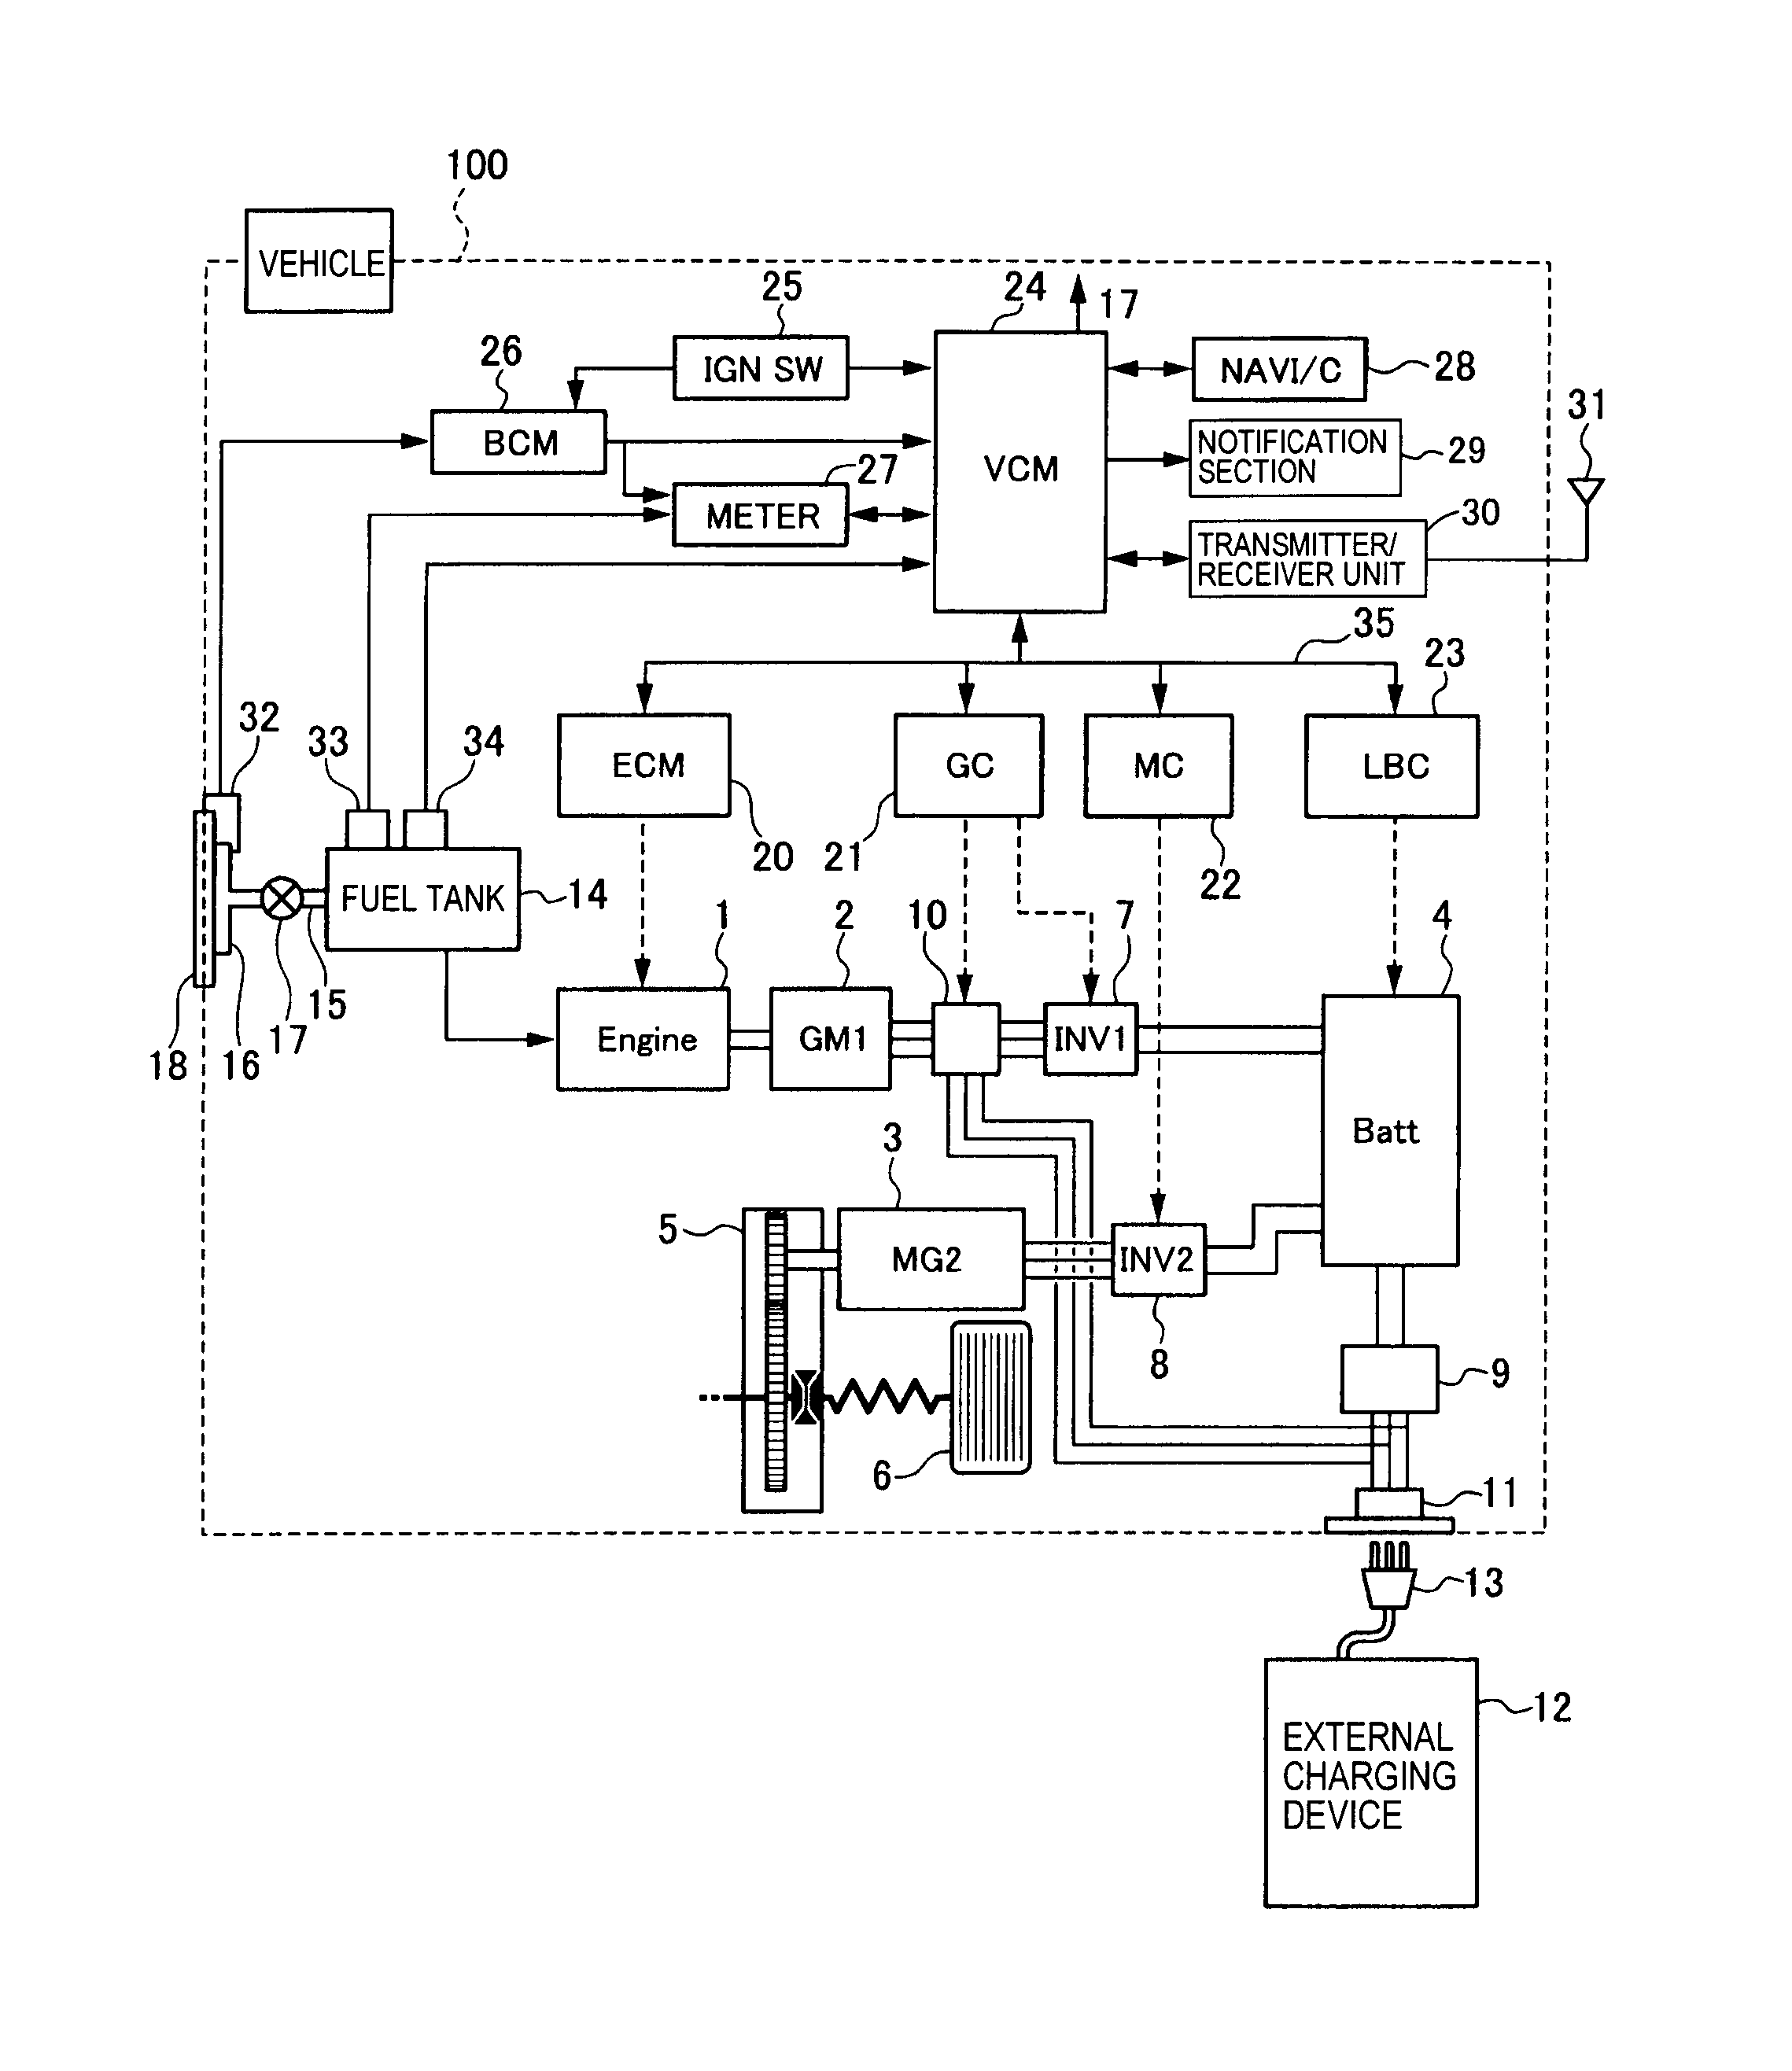 wiring diagram for york furnace s1- 7990-319p